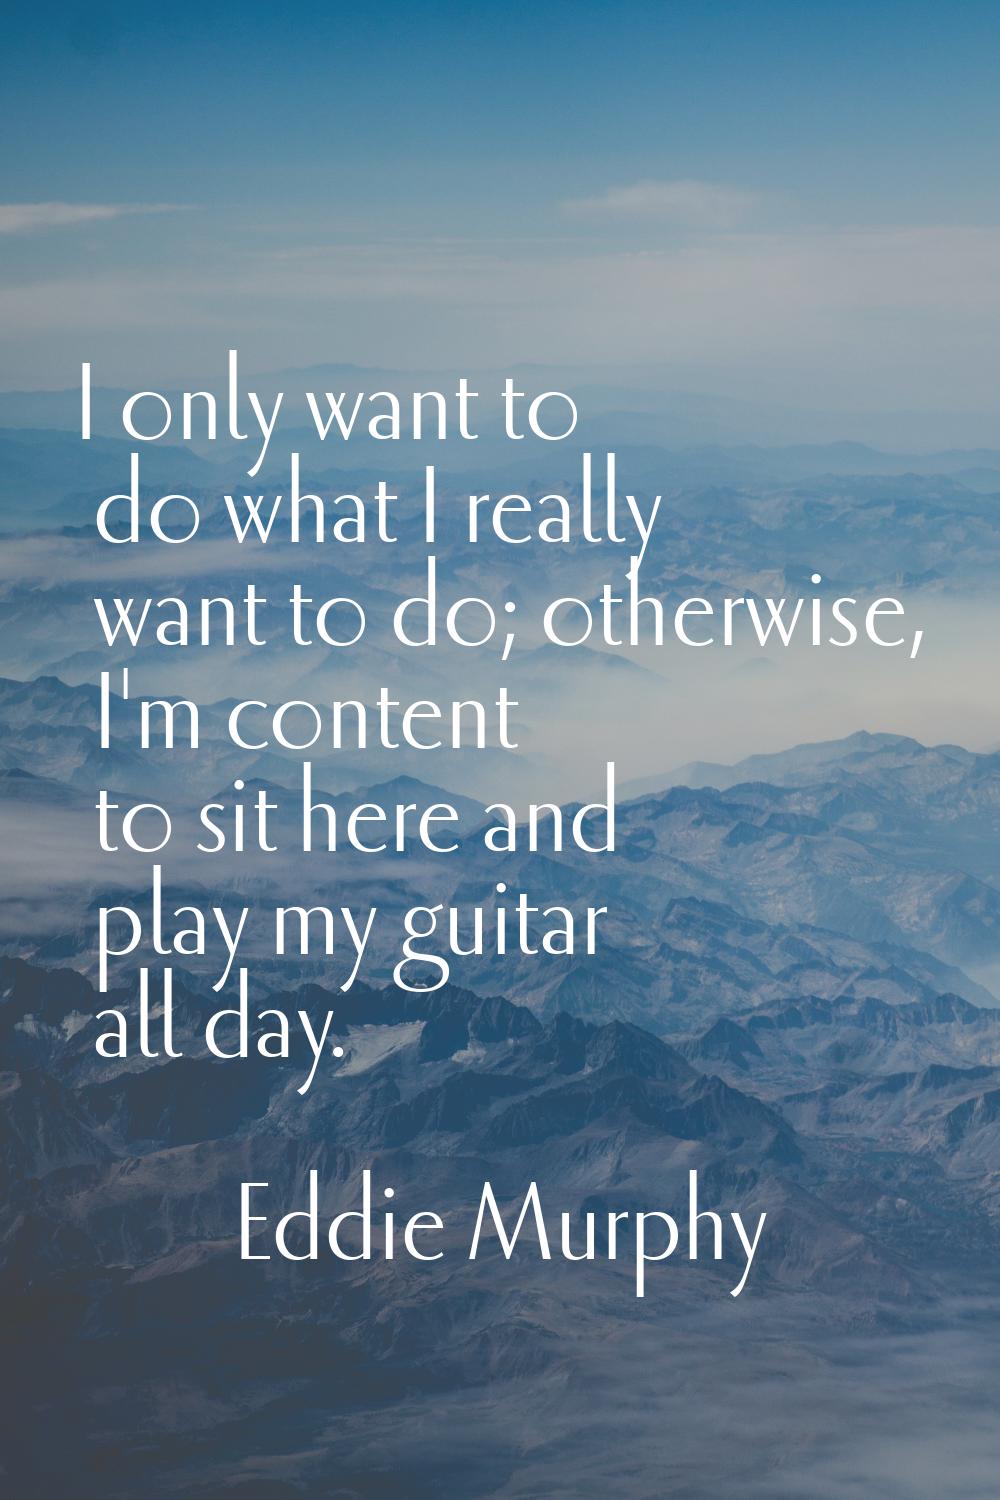 I only want to do what I really want to do; otherwise, I'm content to sit here and play my guitar a